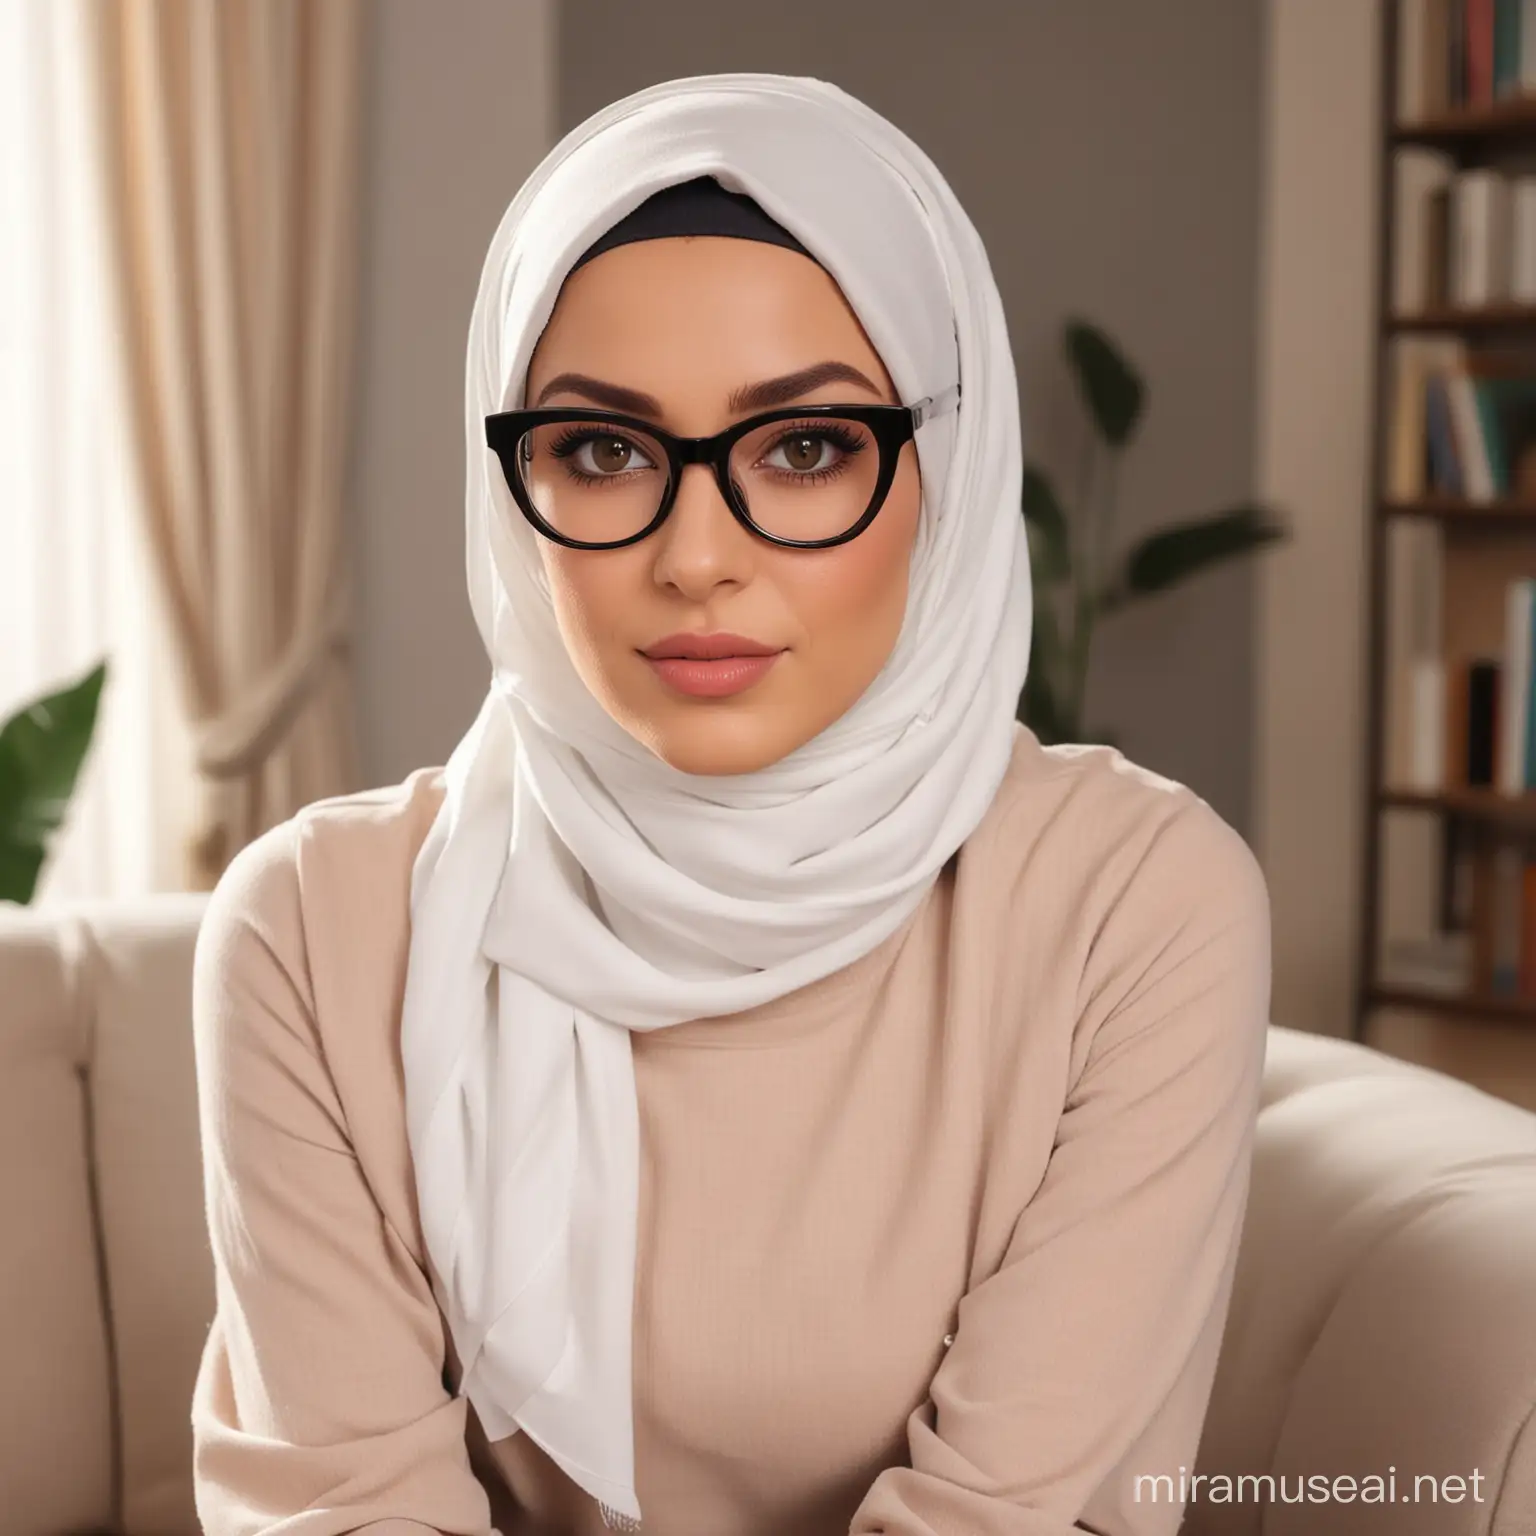 Create a female, fair skin, wearing a trendy stylist hijab, wearing a cat eye spectacle, light make up, presenter, face and eyes facing the camera, she's sitting on a sofa, in a nice living room background, high quality, 4k resolution.